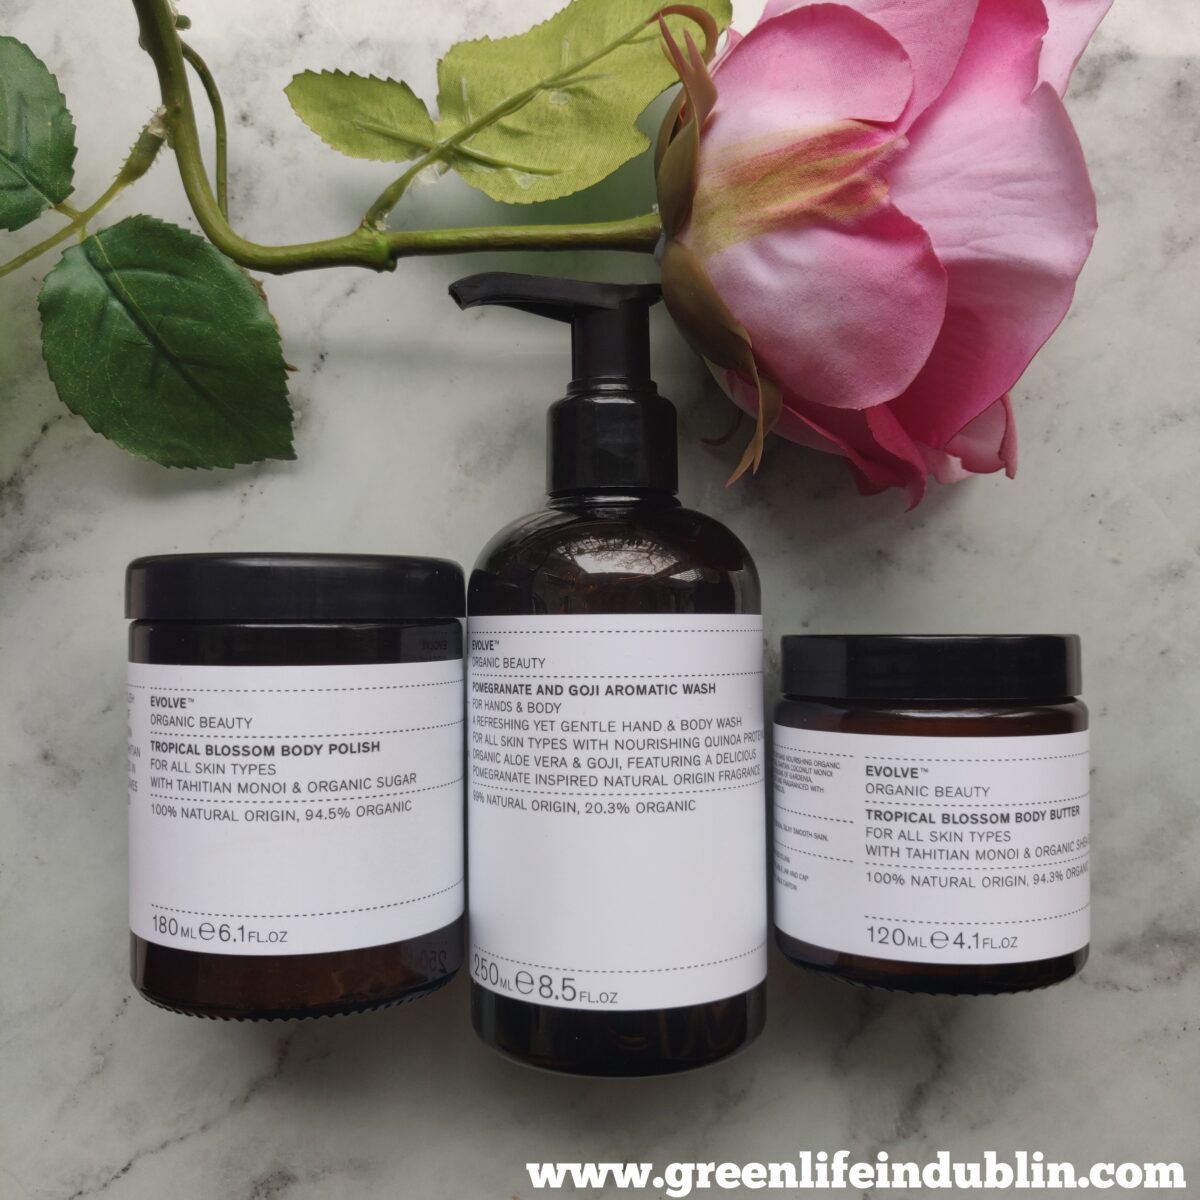 Home Spa with Evolve Organic Beauty